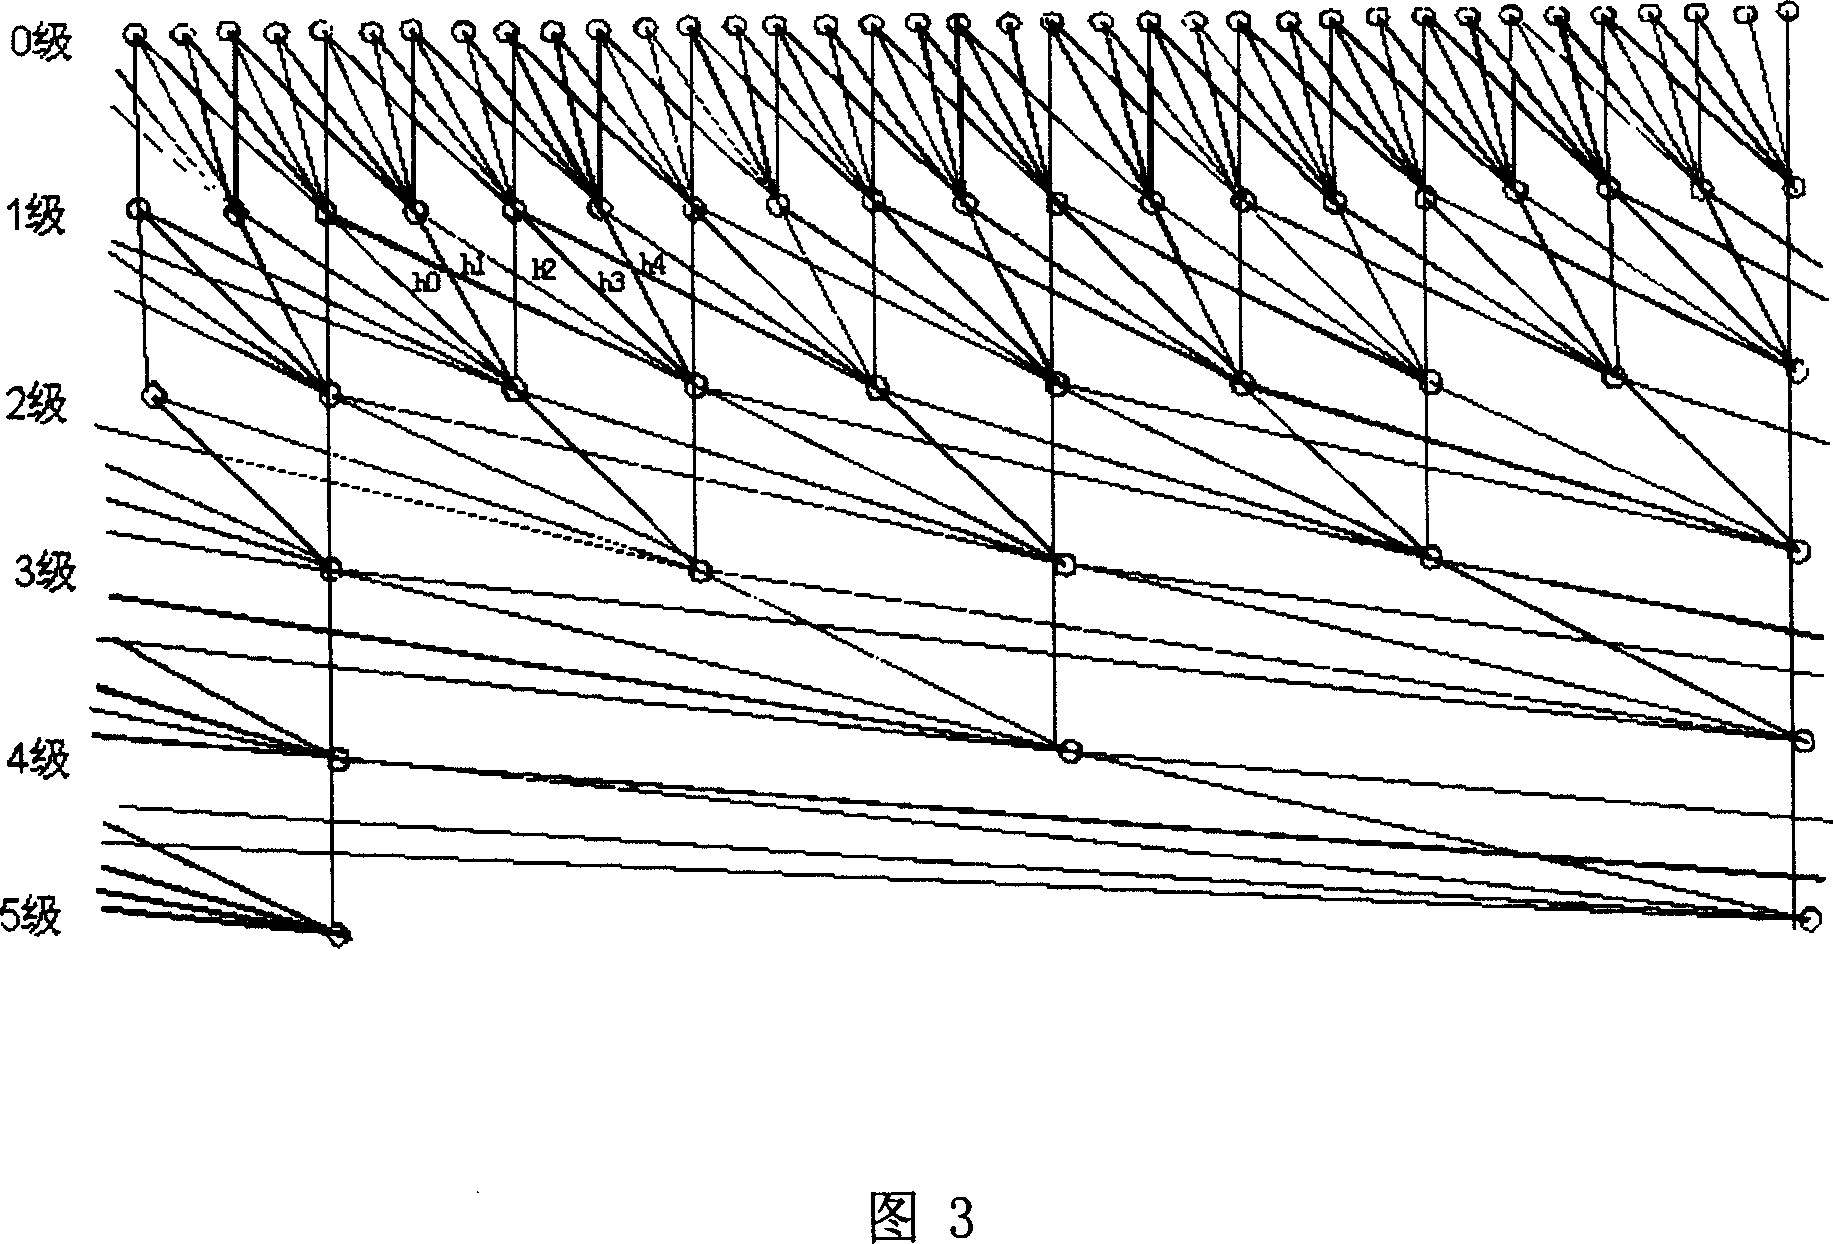 High resolution static frequency domain removed magnetotelluric method